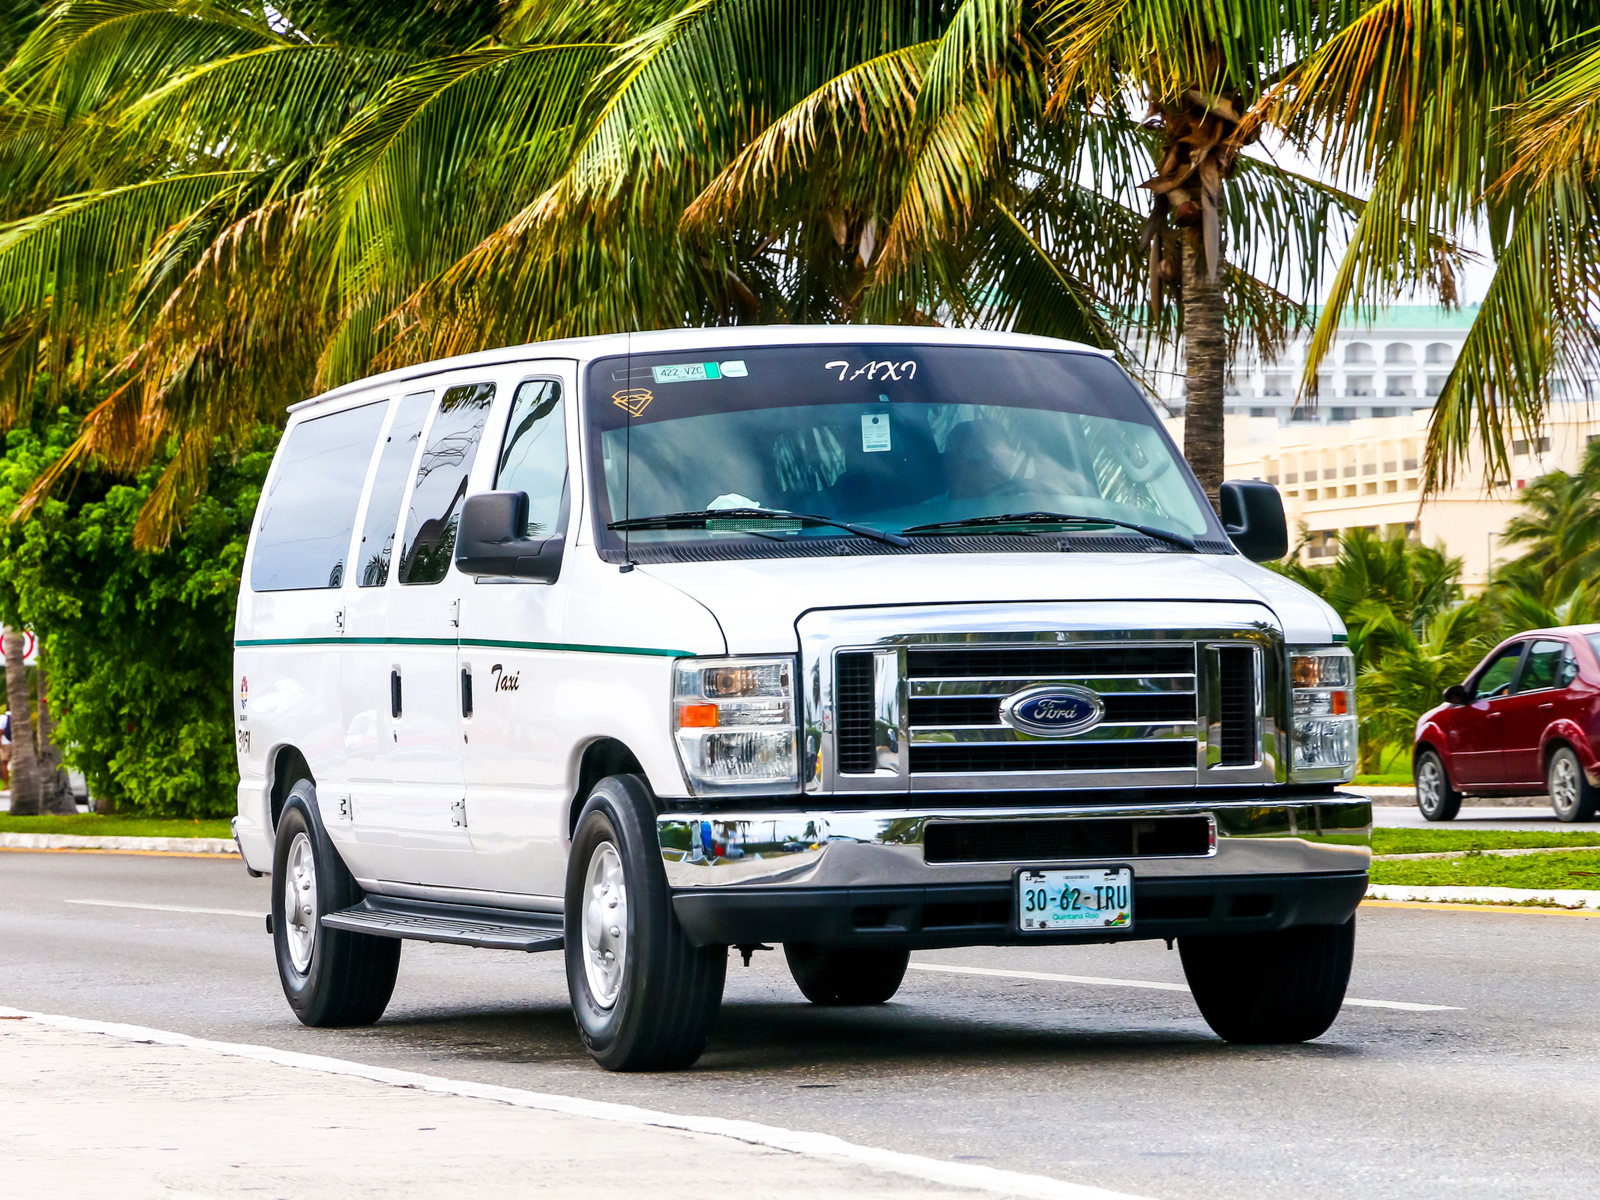 A white ford econoline taxi going to the best all-inclusive resorts in Cancun